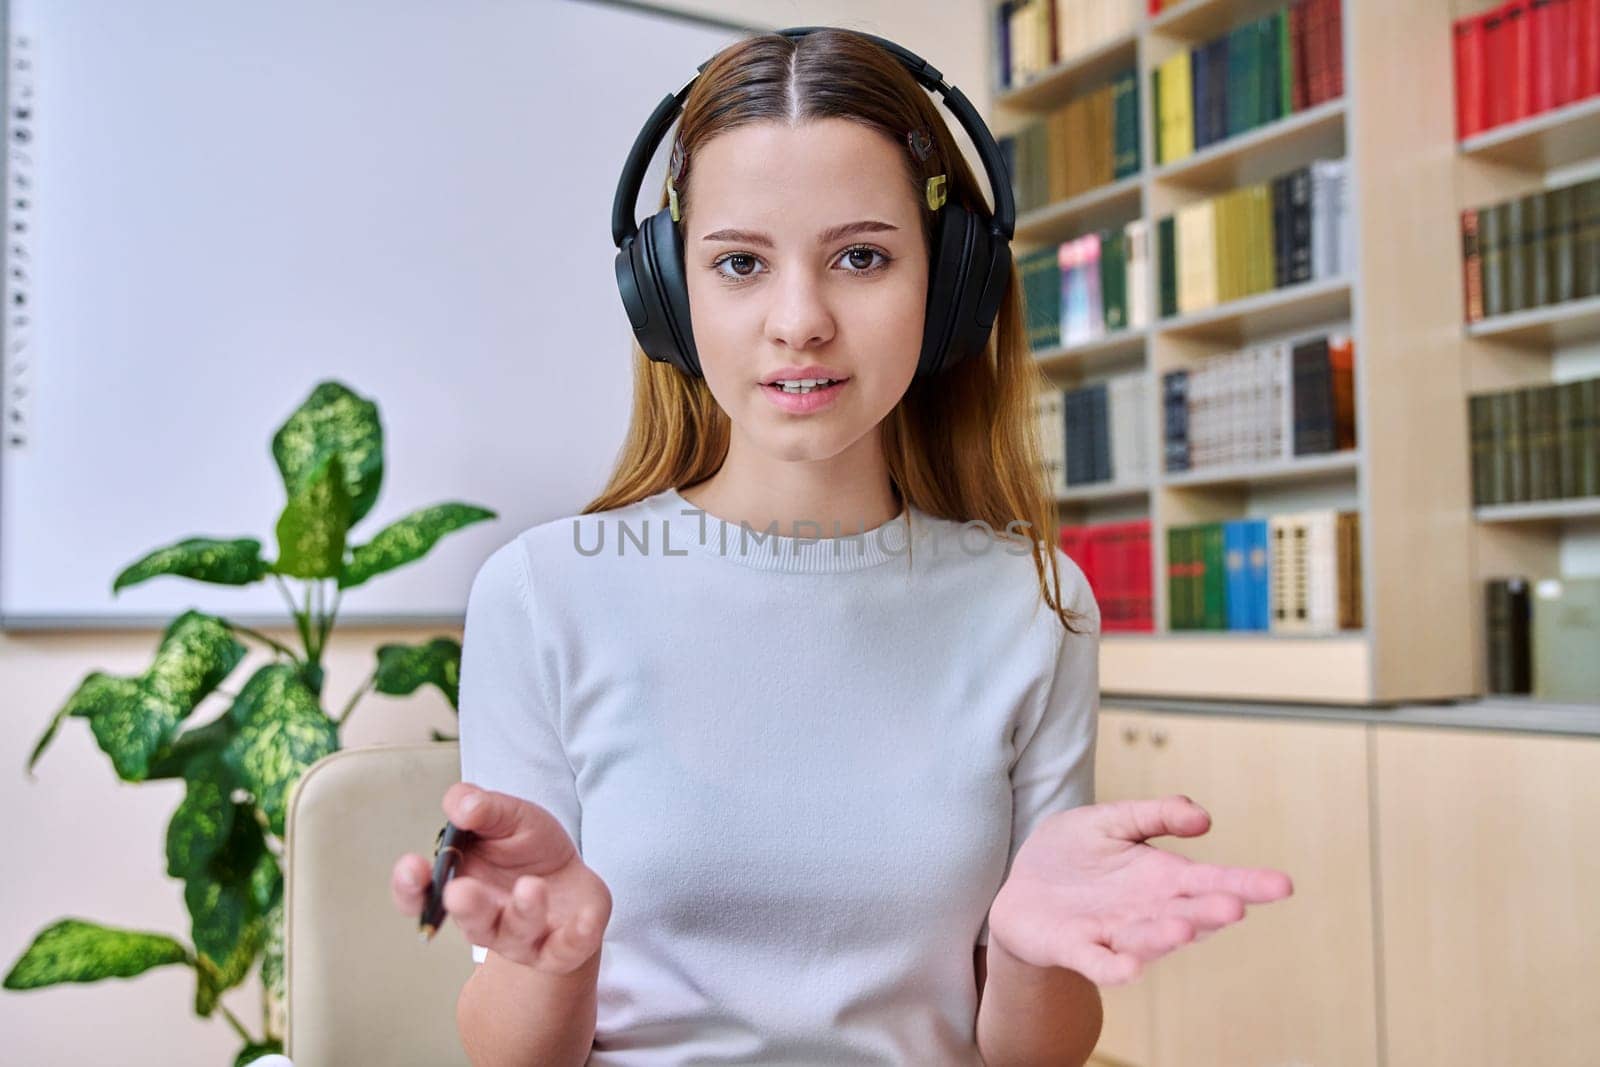 Webcam view of teenage girl, high school student, in headphones, talking to camera. Female teenager studying remotely, video conference chat, online test exam lesson. Technology education adolescence